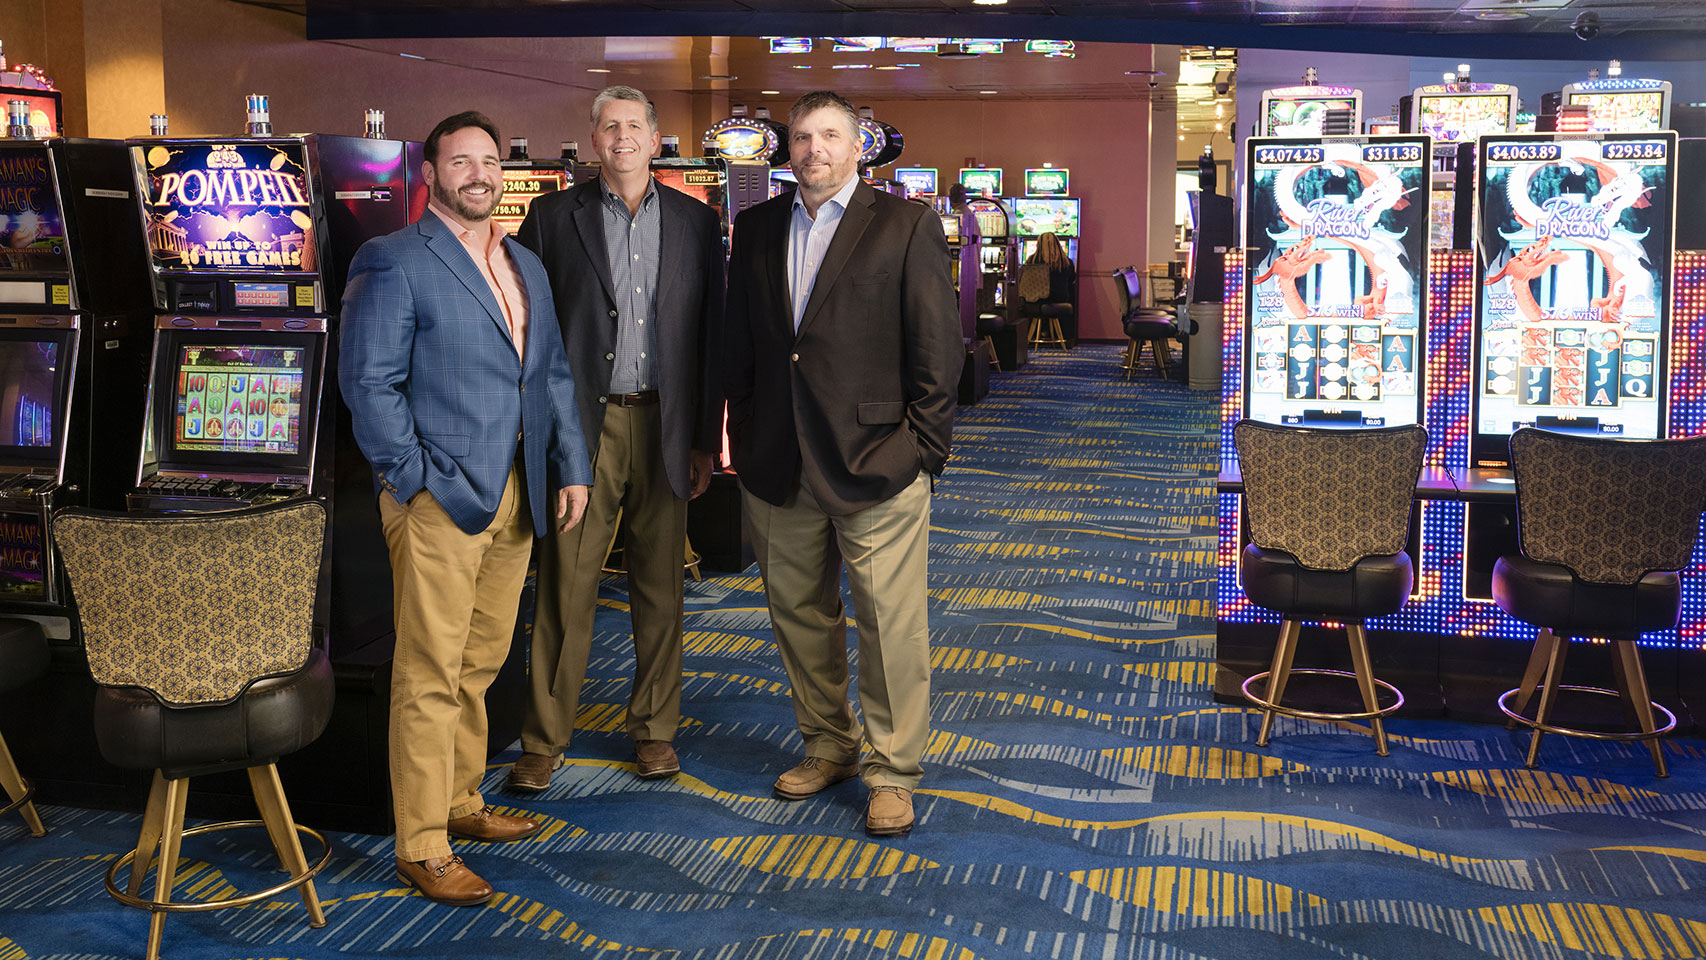 Men in suits standing in a casino, posing for the camera